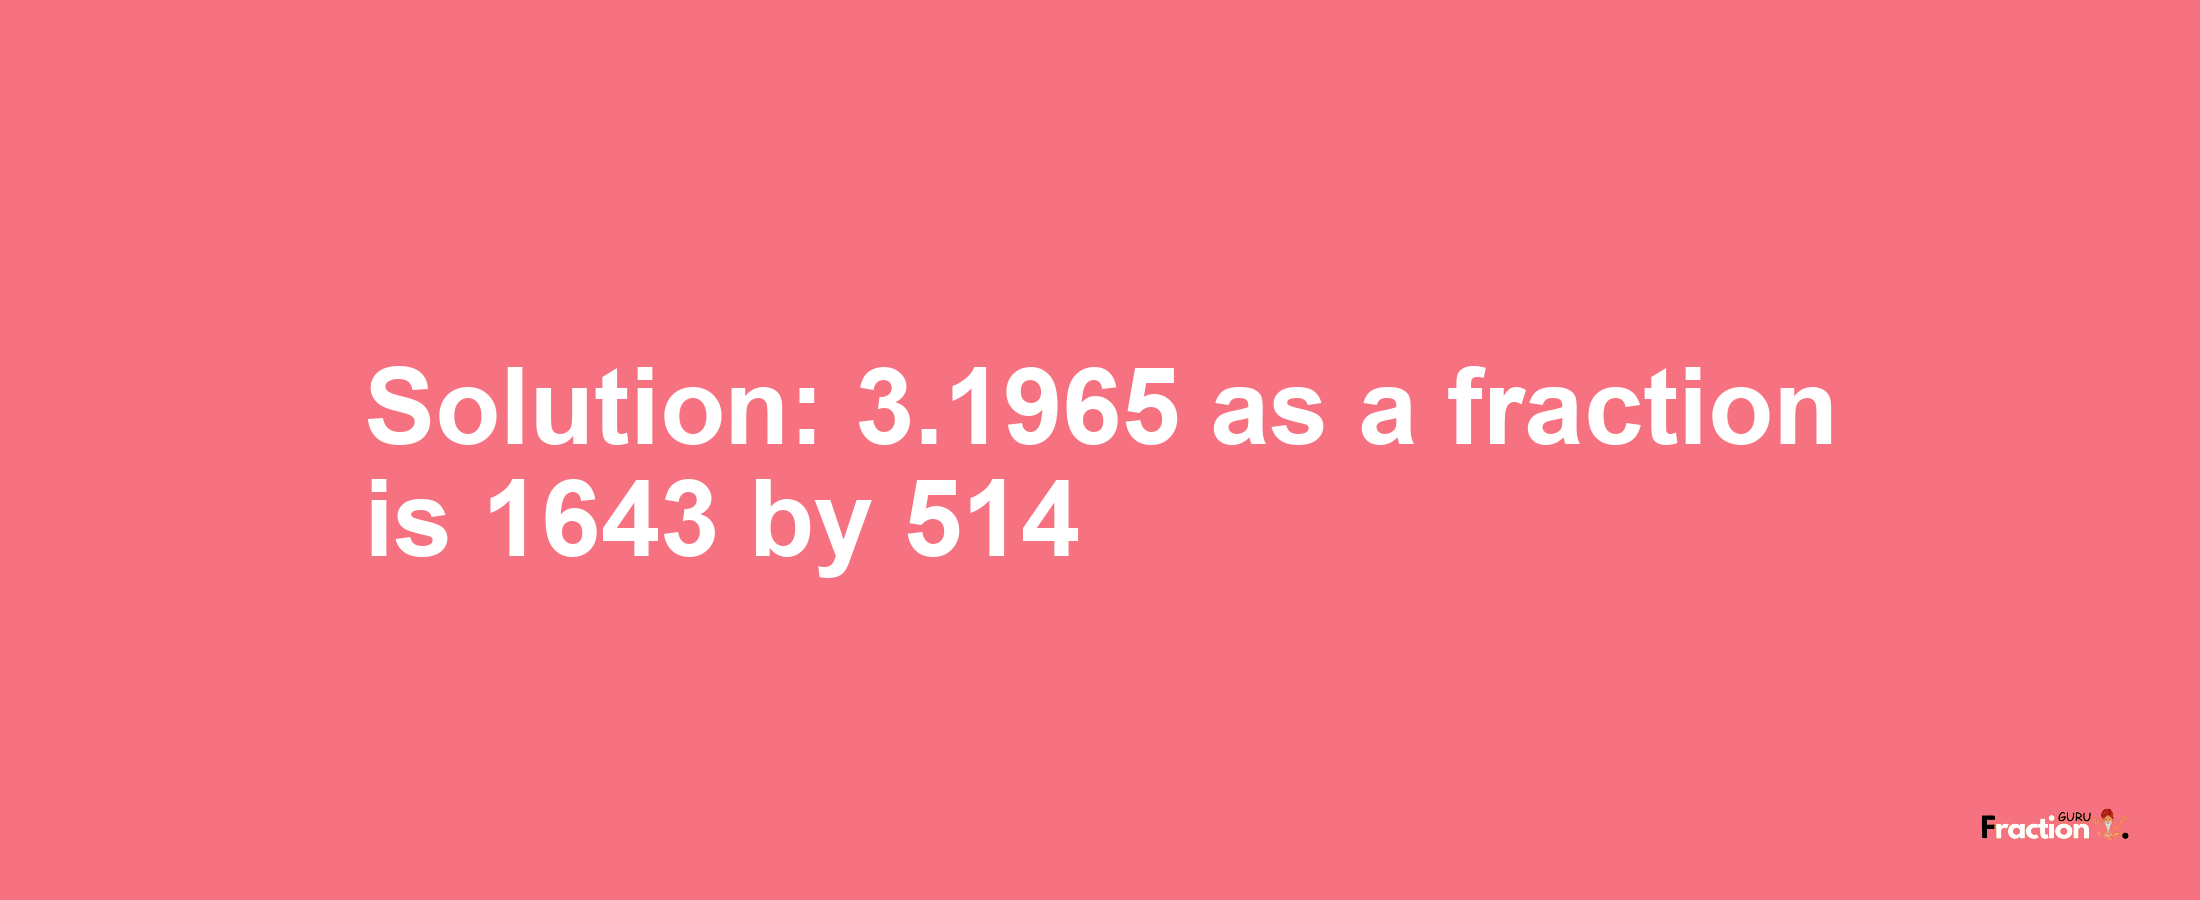 Solution:3.1965 as a fraction is 1643/514